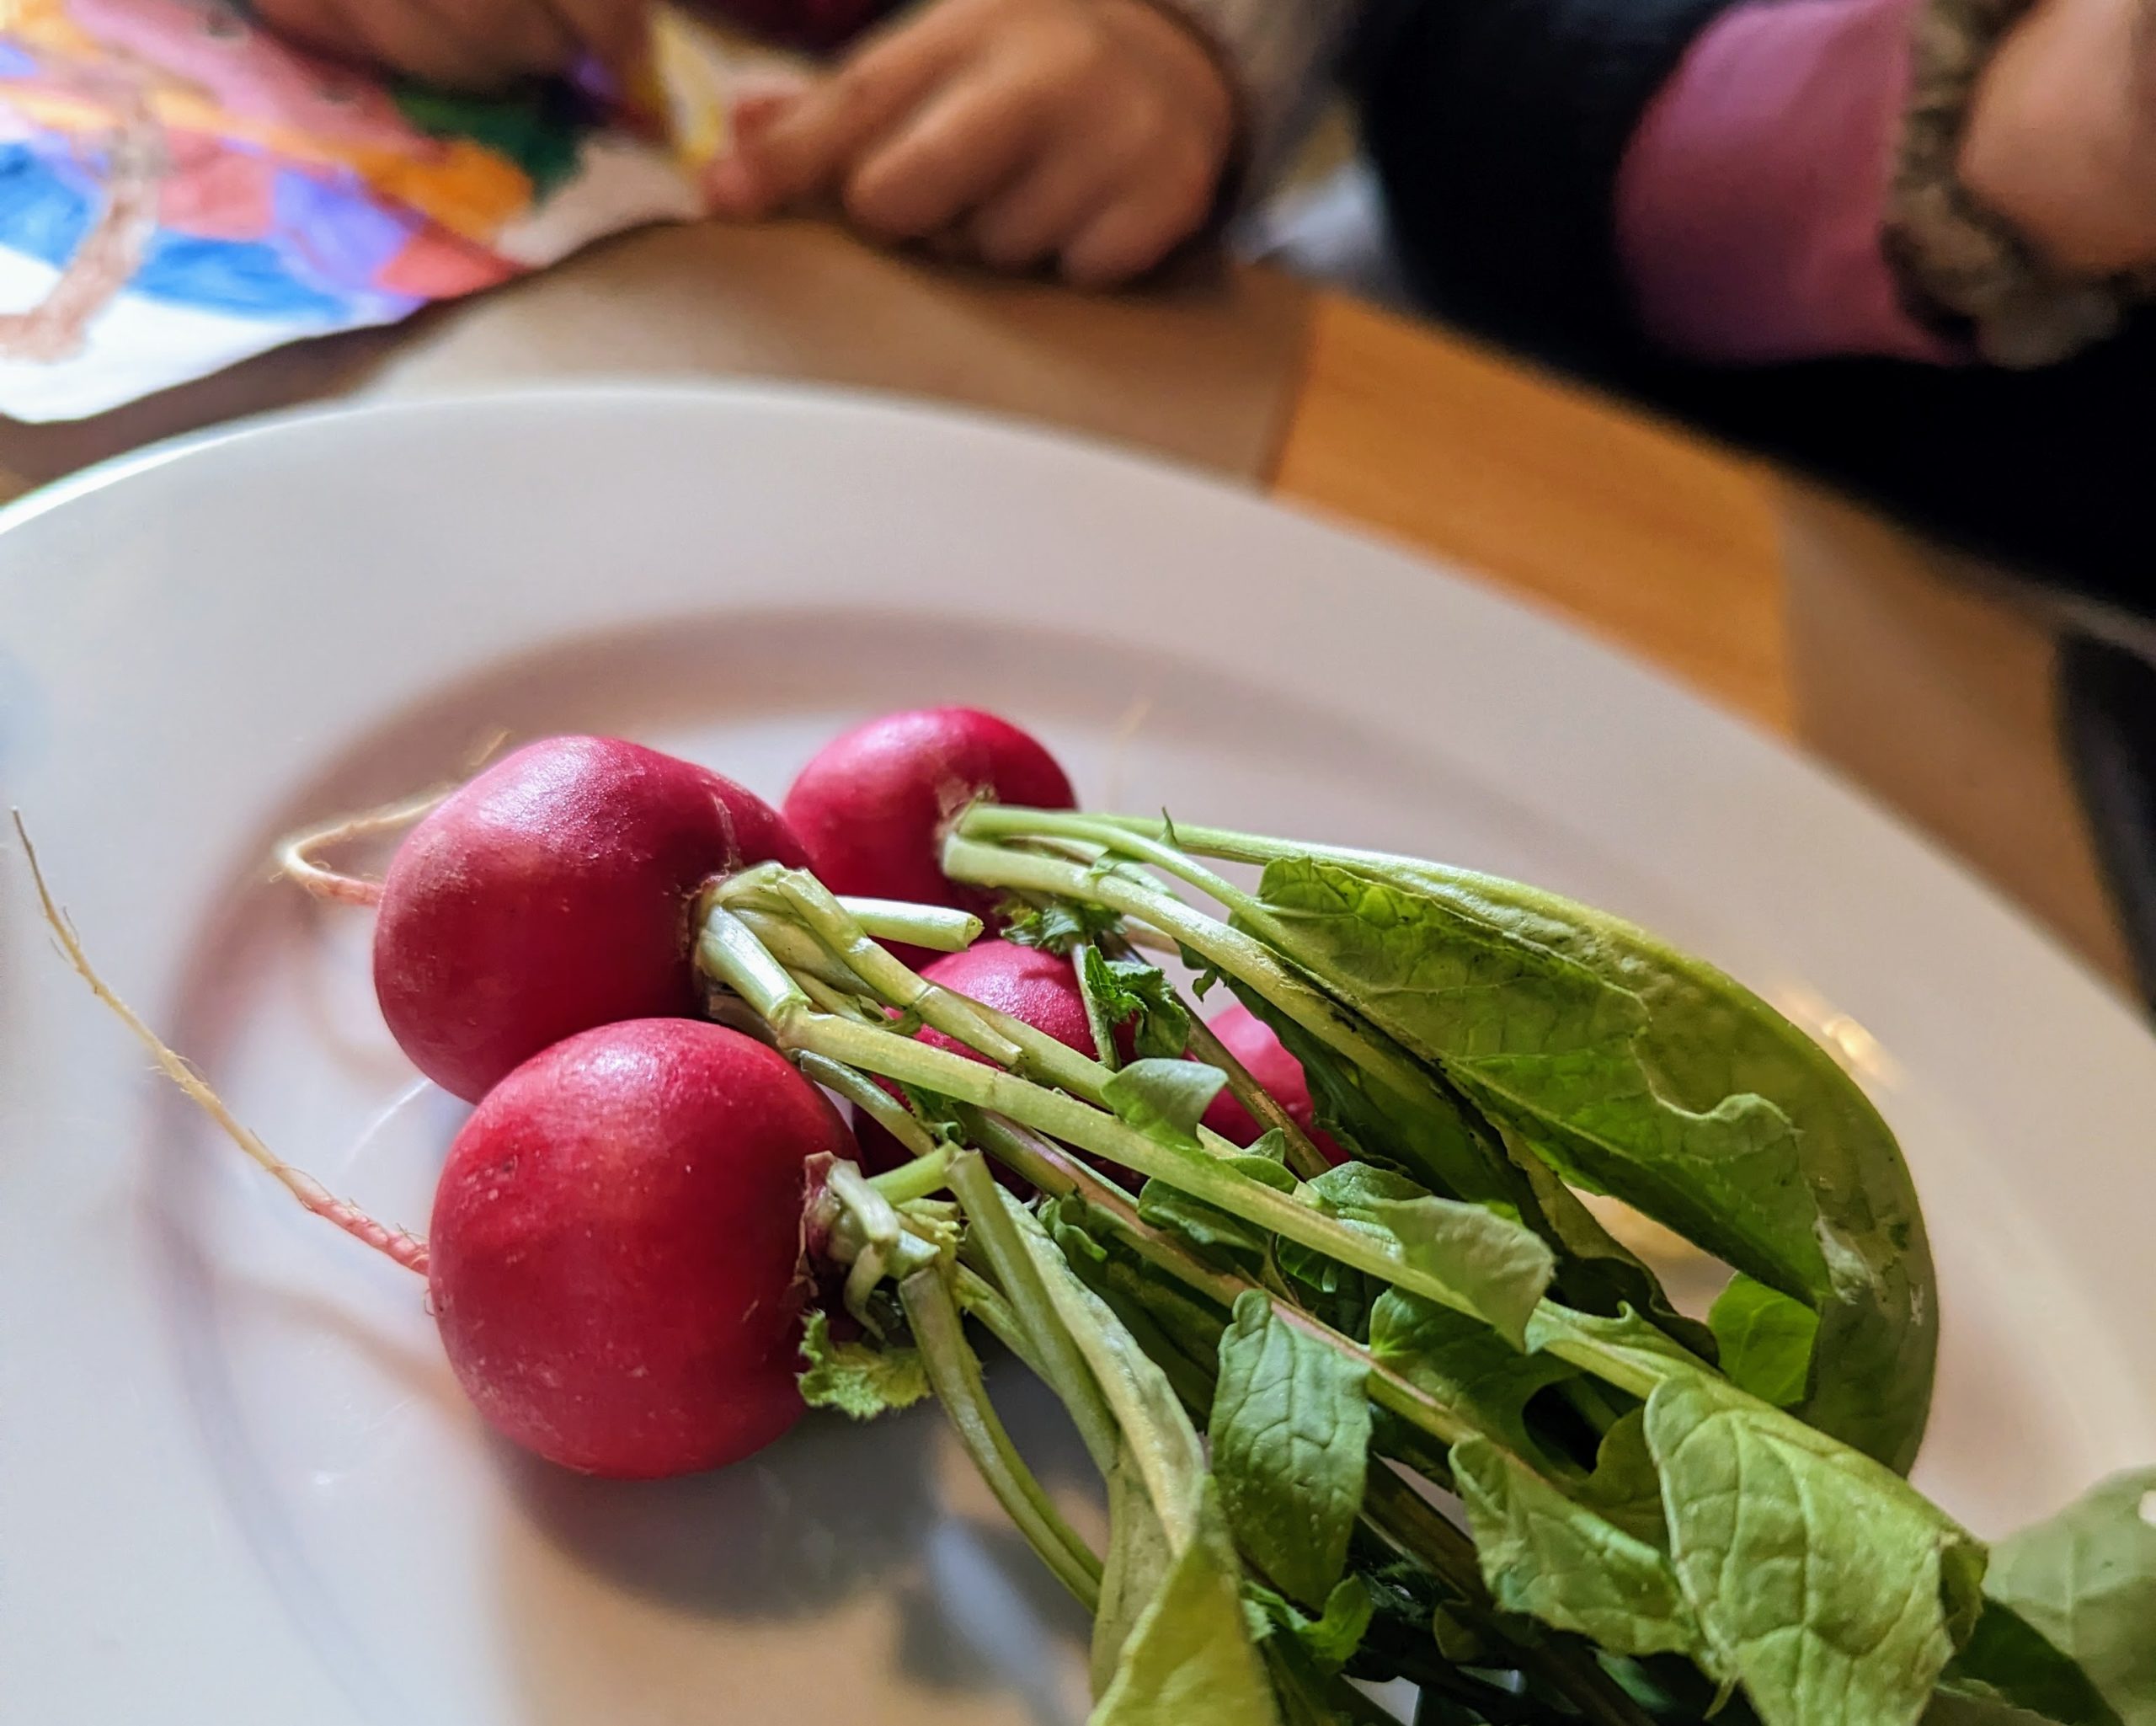 Radishes a seasonal vegtable we recommend you try with butter on this food tour!